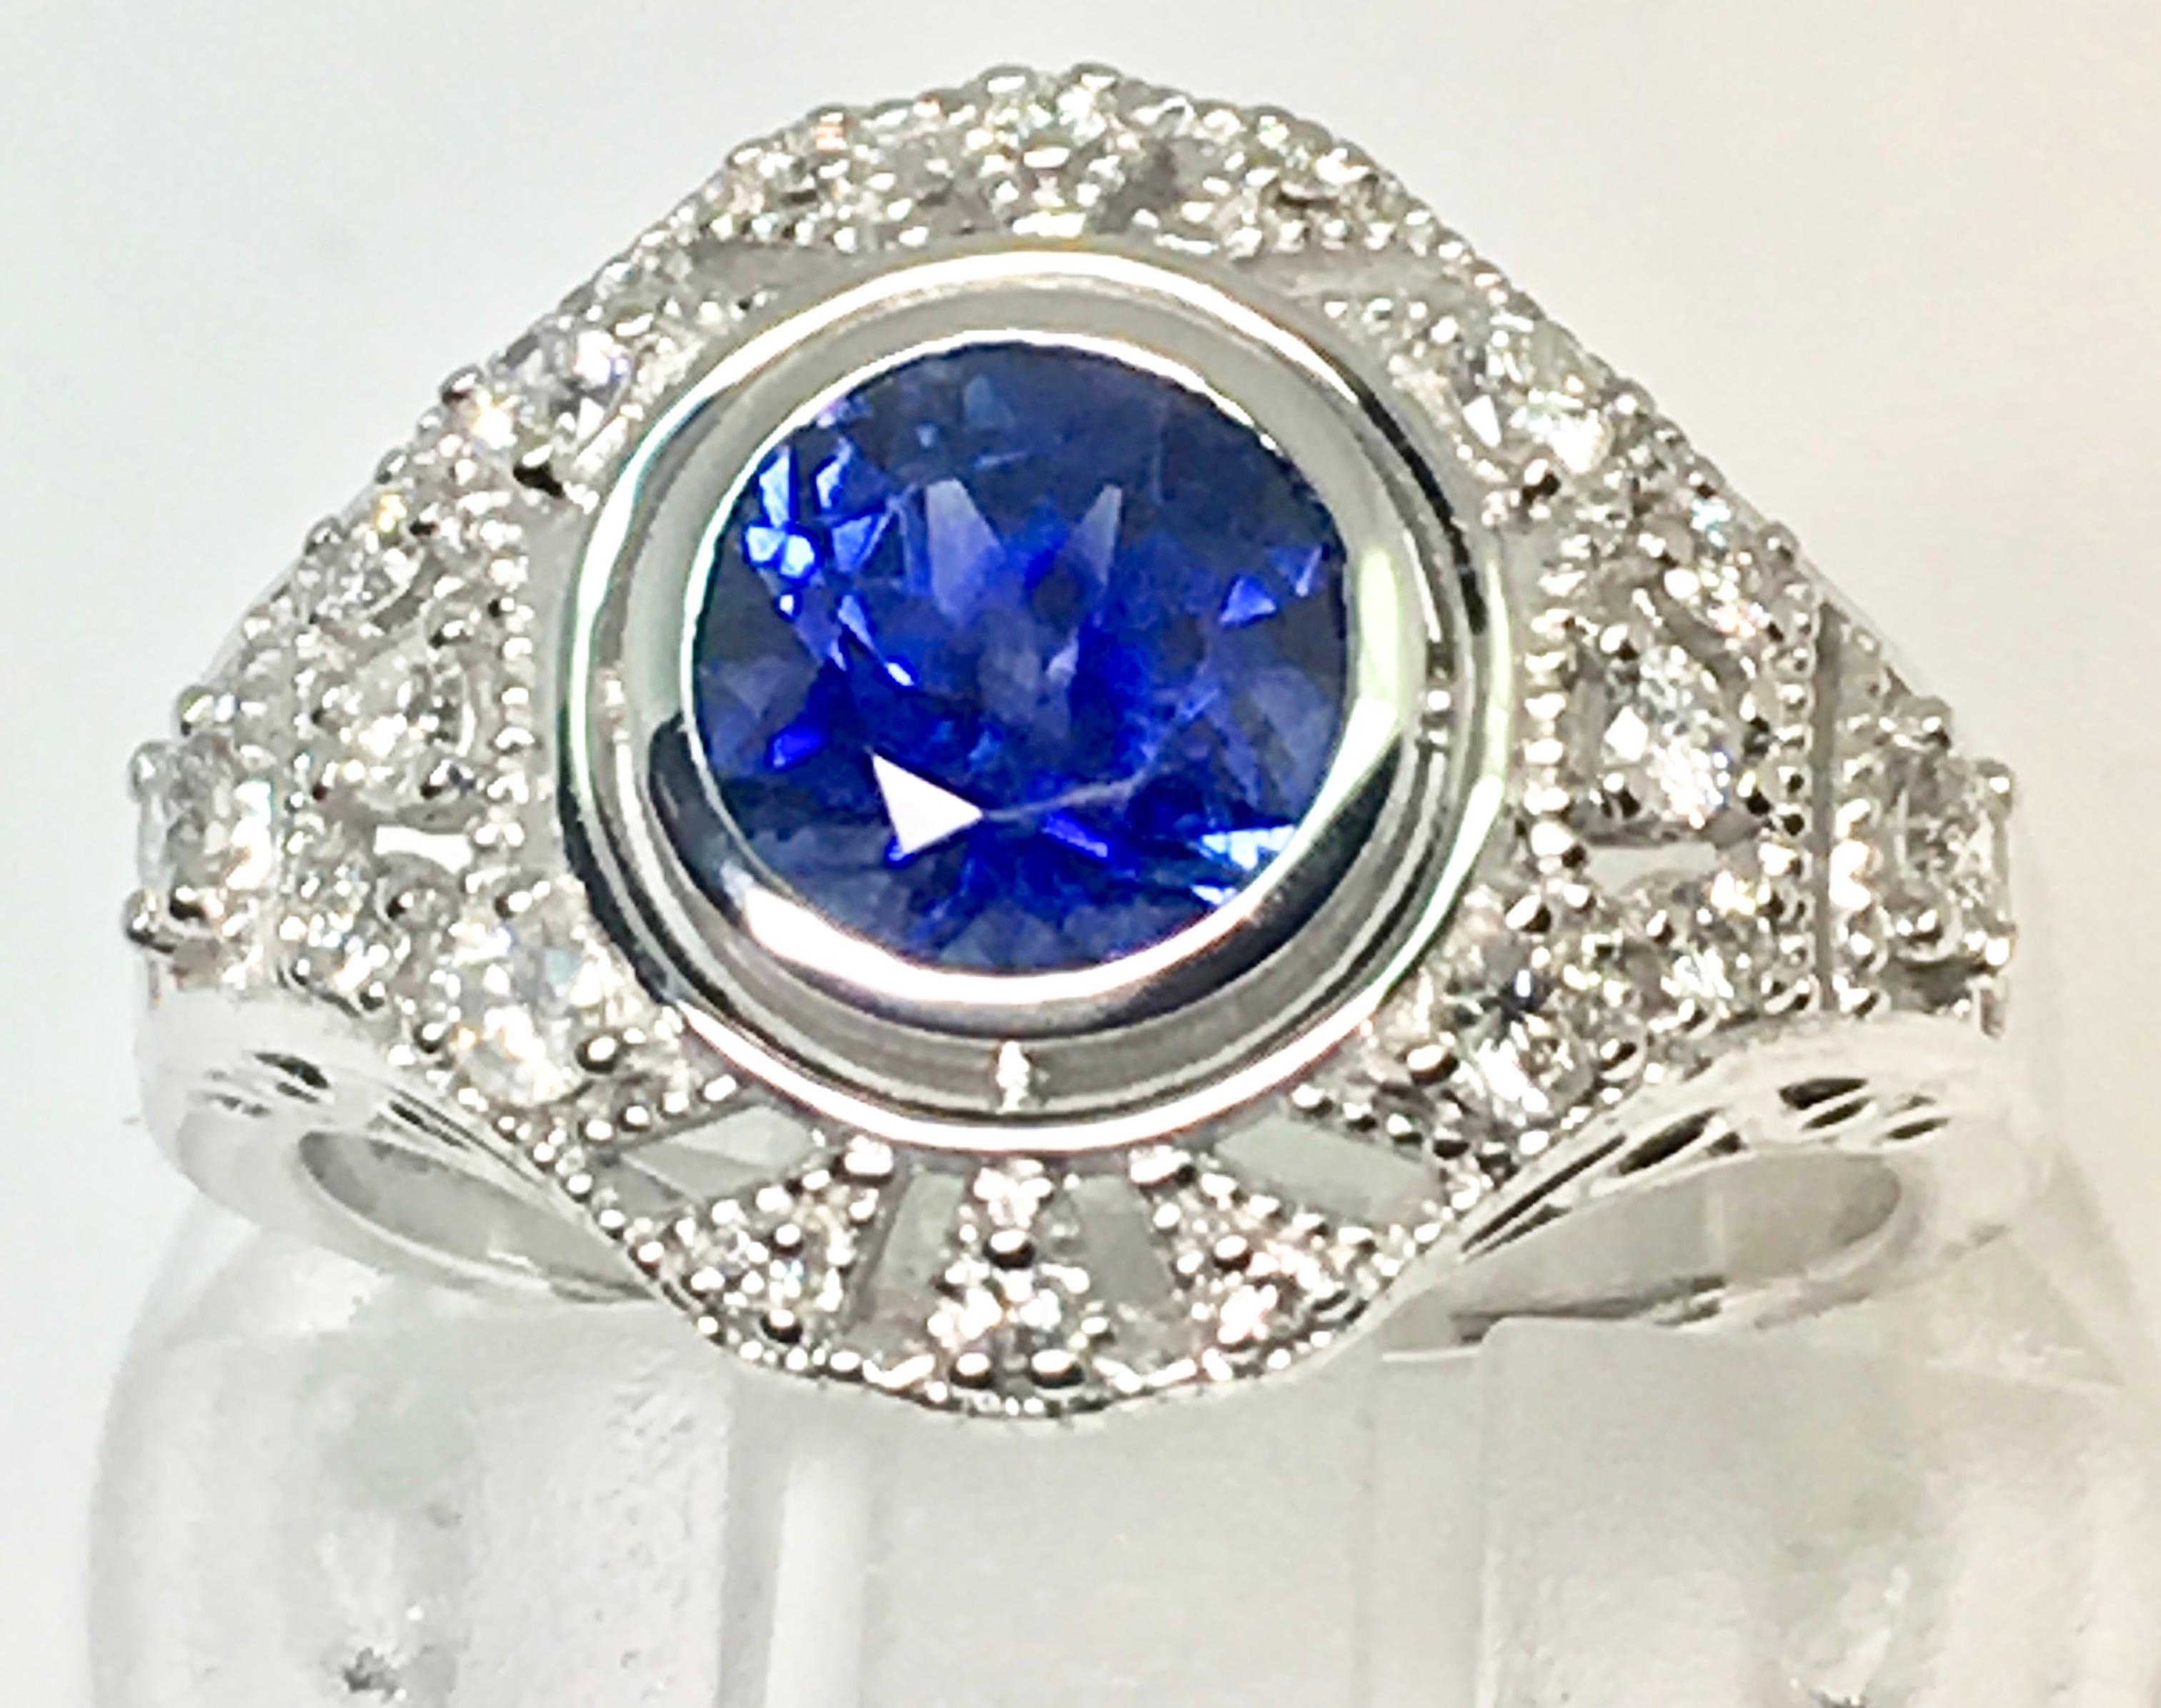 A Natural round sapphire weighing...  origin.... .This gorgeous velvet blue sapphire is rub over set in 18ct white gold. The central stone is surrounded by a cluster of  diamonds  and diamonds a third of the way down the shank. it design we wanted